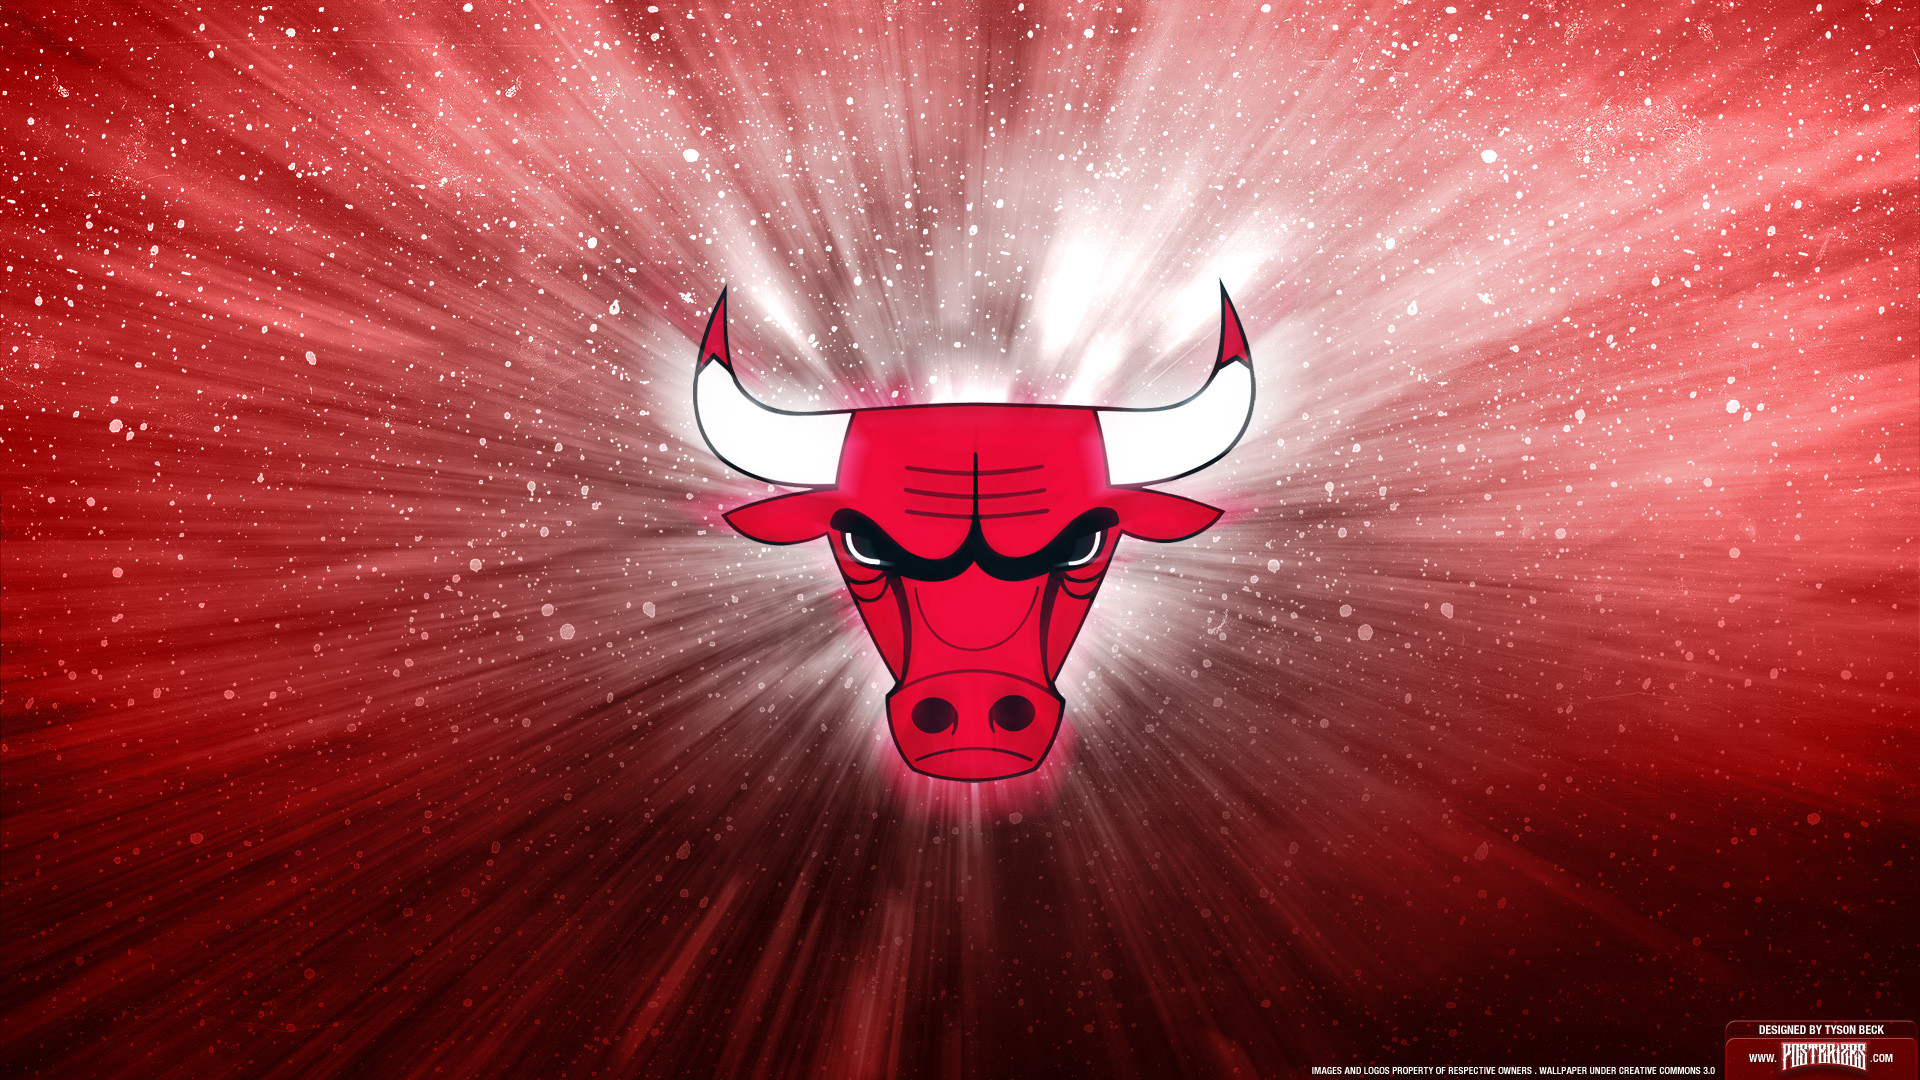 1920x1080 Every NBA Team Logo Redesigned on Behance NBA Logo Backgrounds Wallpapers)